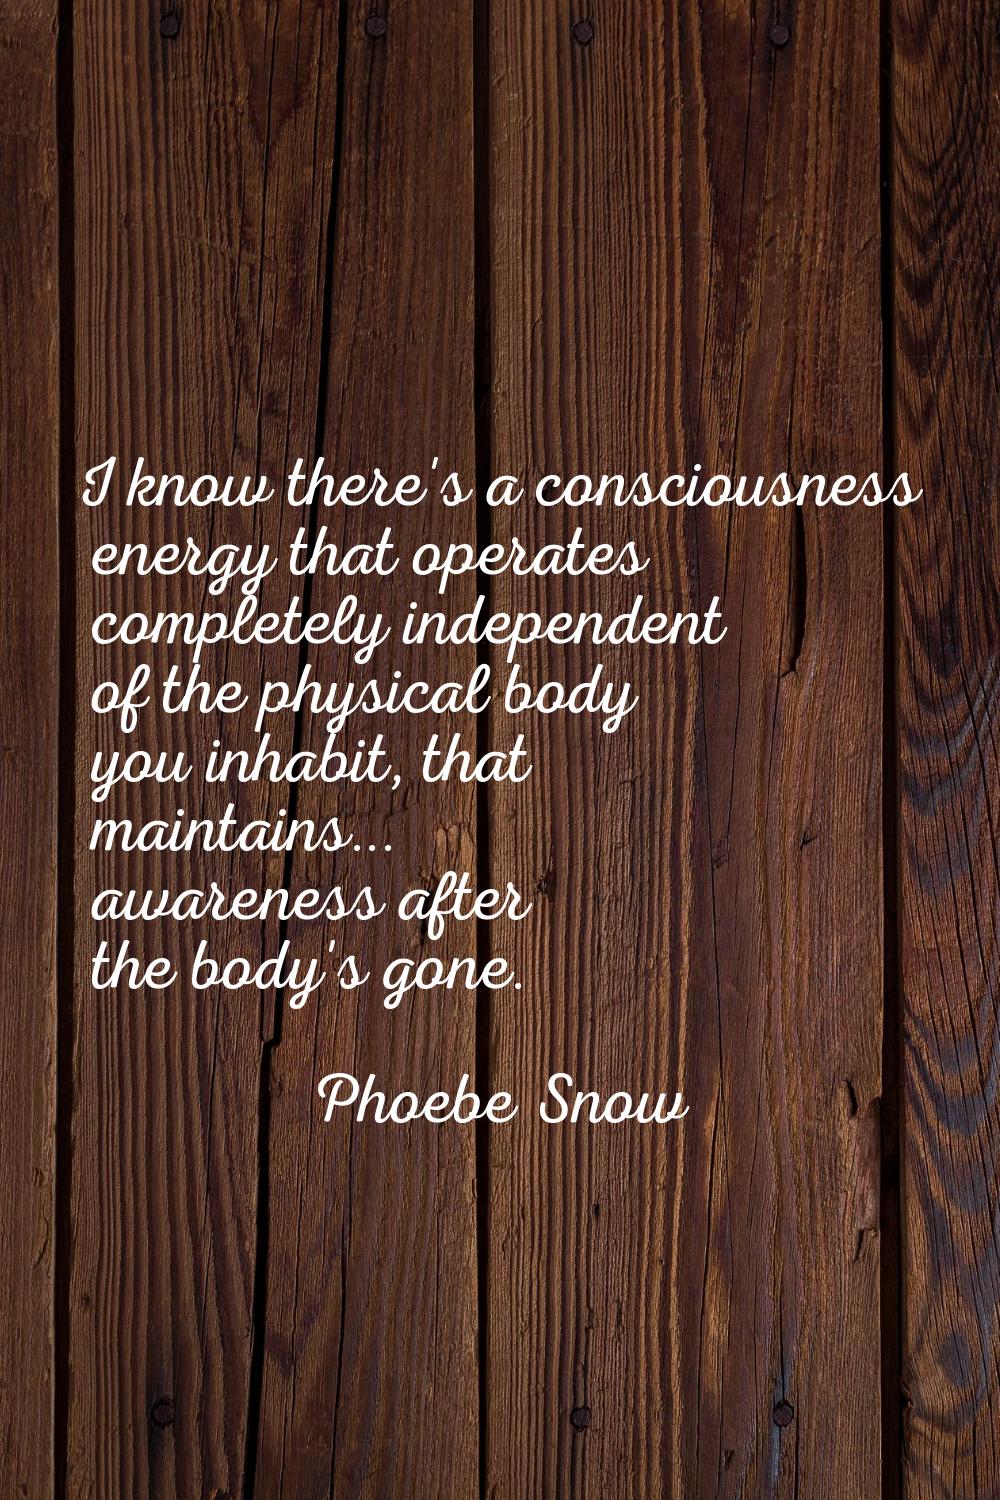 I know there's a consciousness energy that operates completely independent of the physical body you